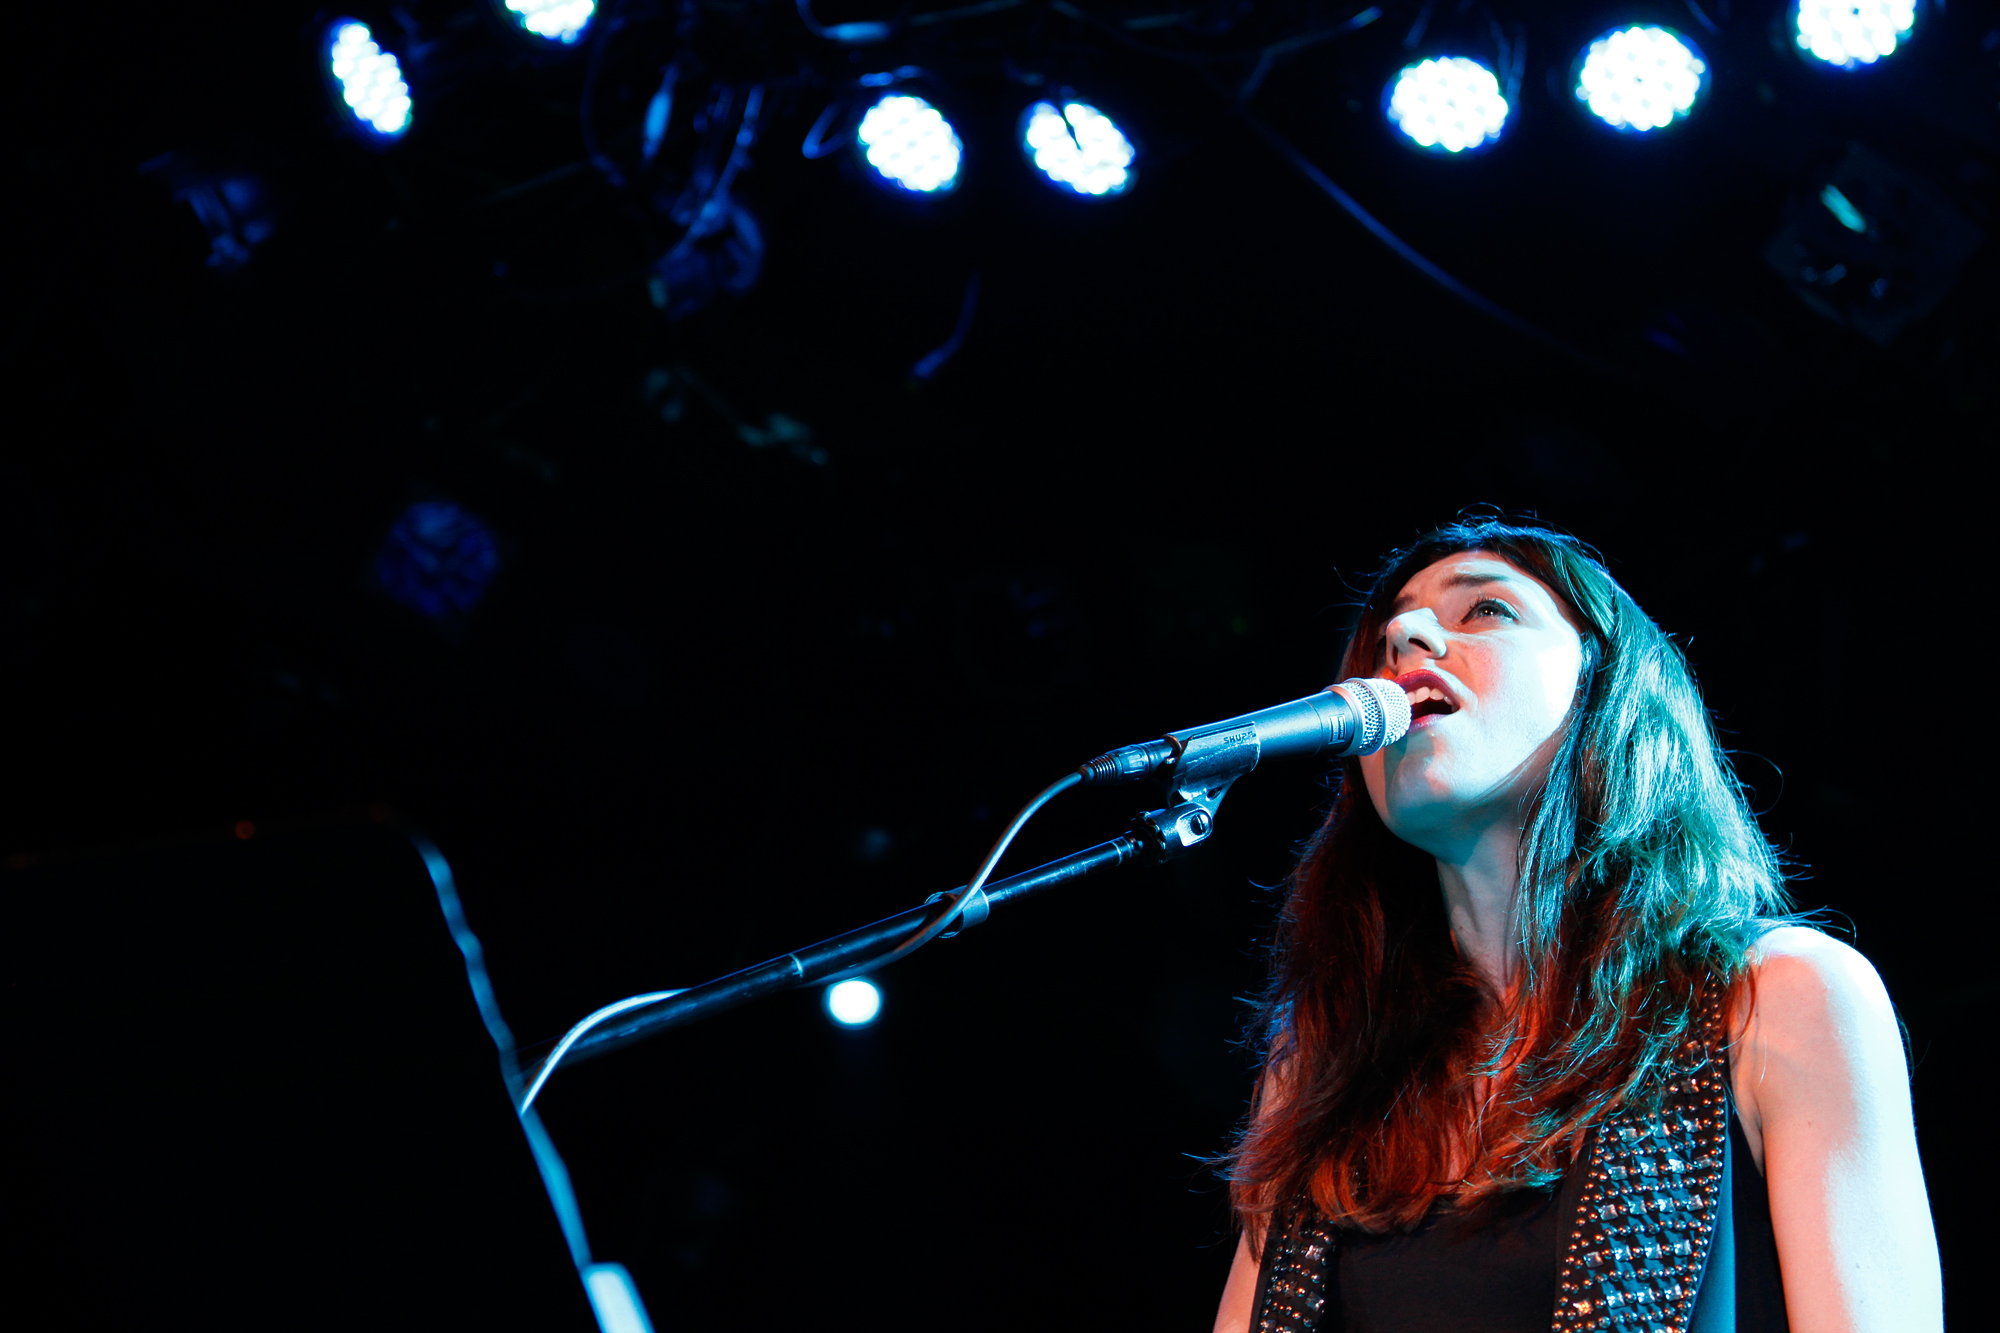 Julia Holter plays at (le) Poisson Rouge in New York, NY on July 12, 2013.